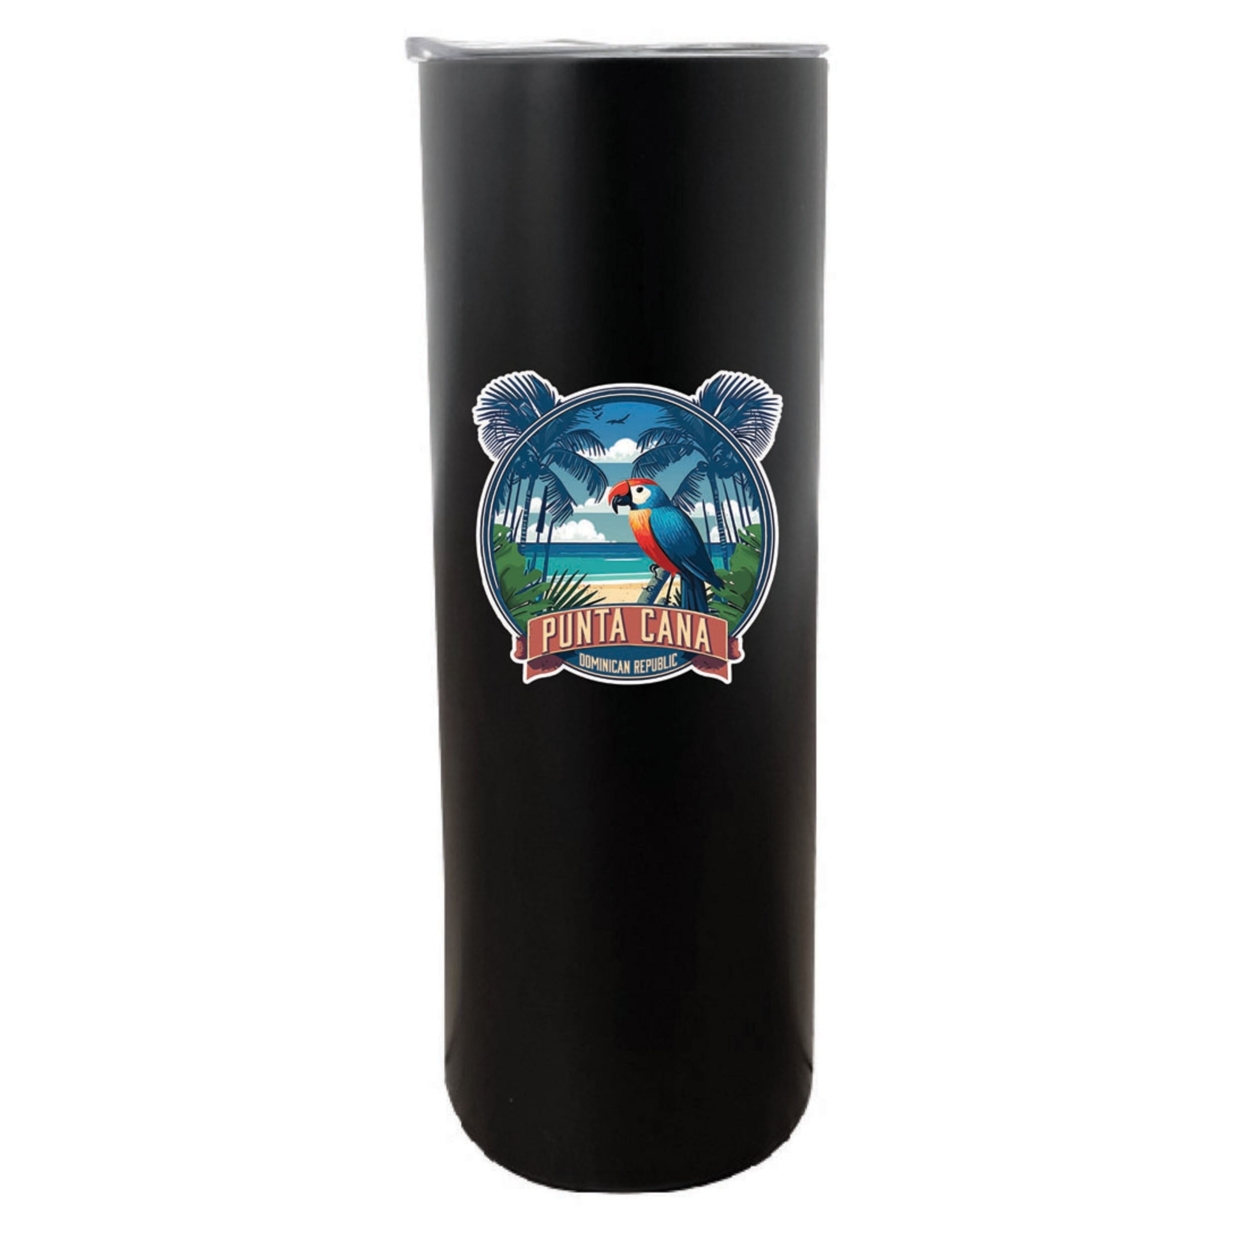 Punta Cana Dominican Republic Souvenir 20 Oz Insulated Stainless Steel Skinny Tumbler - Black, PARROT B